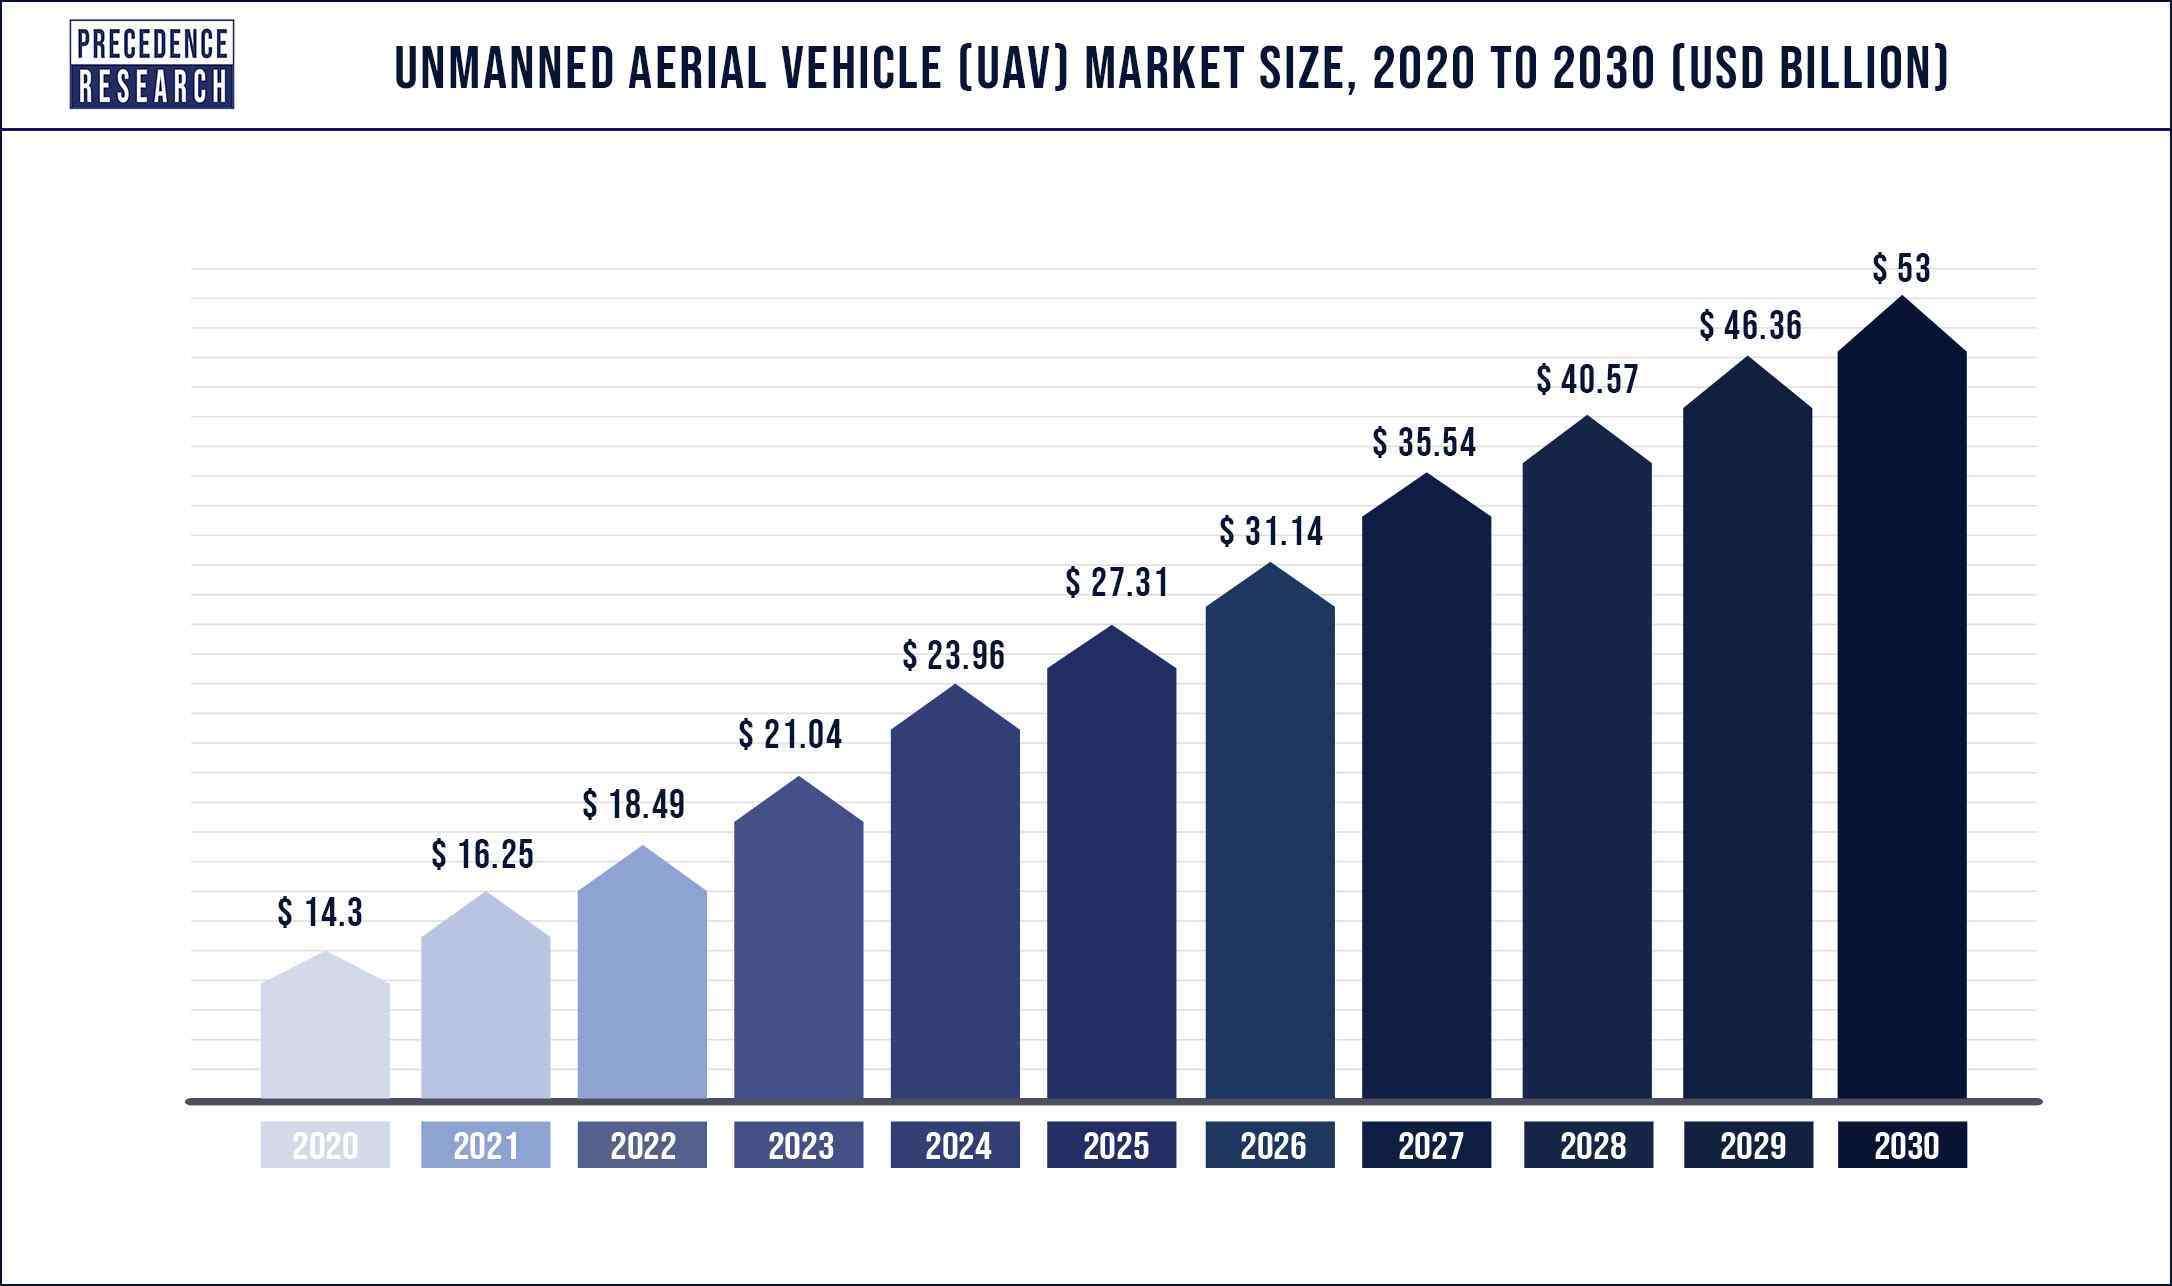 Unmanned Aerial Vehicle (UAV) Market Size 2020 to 2030